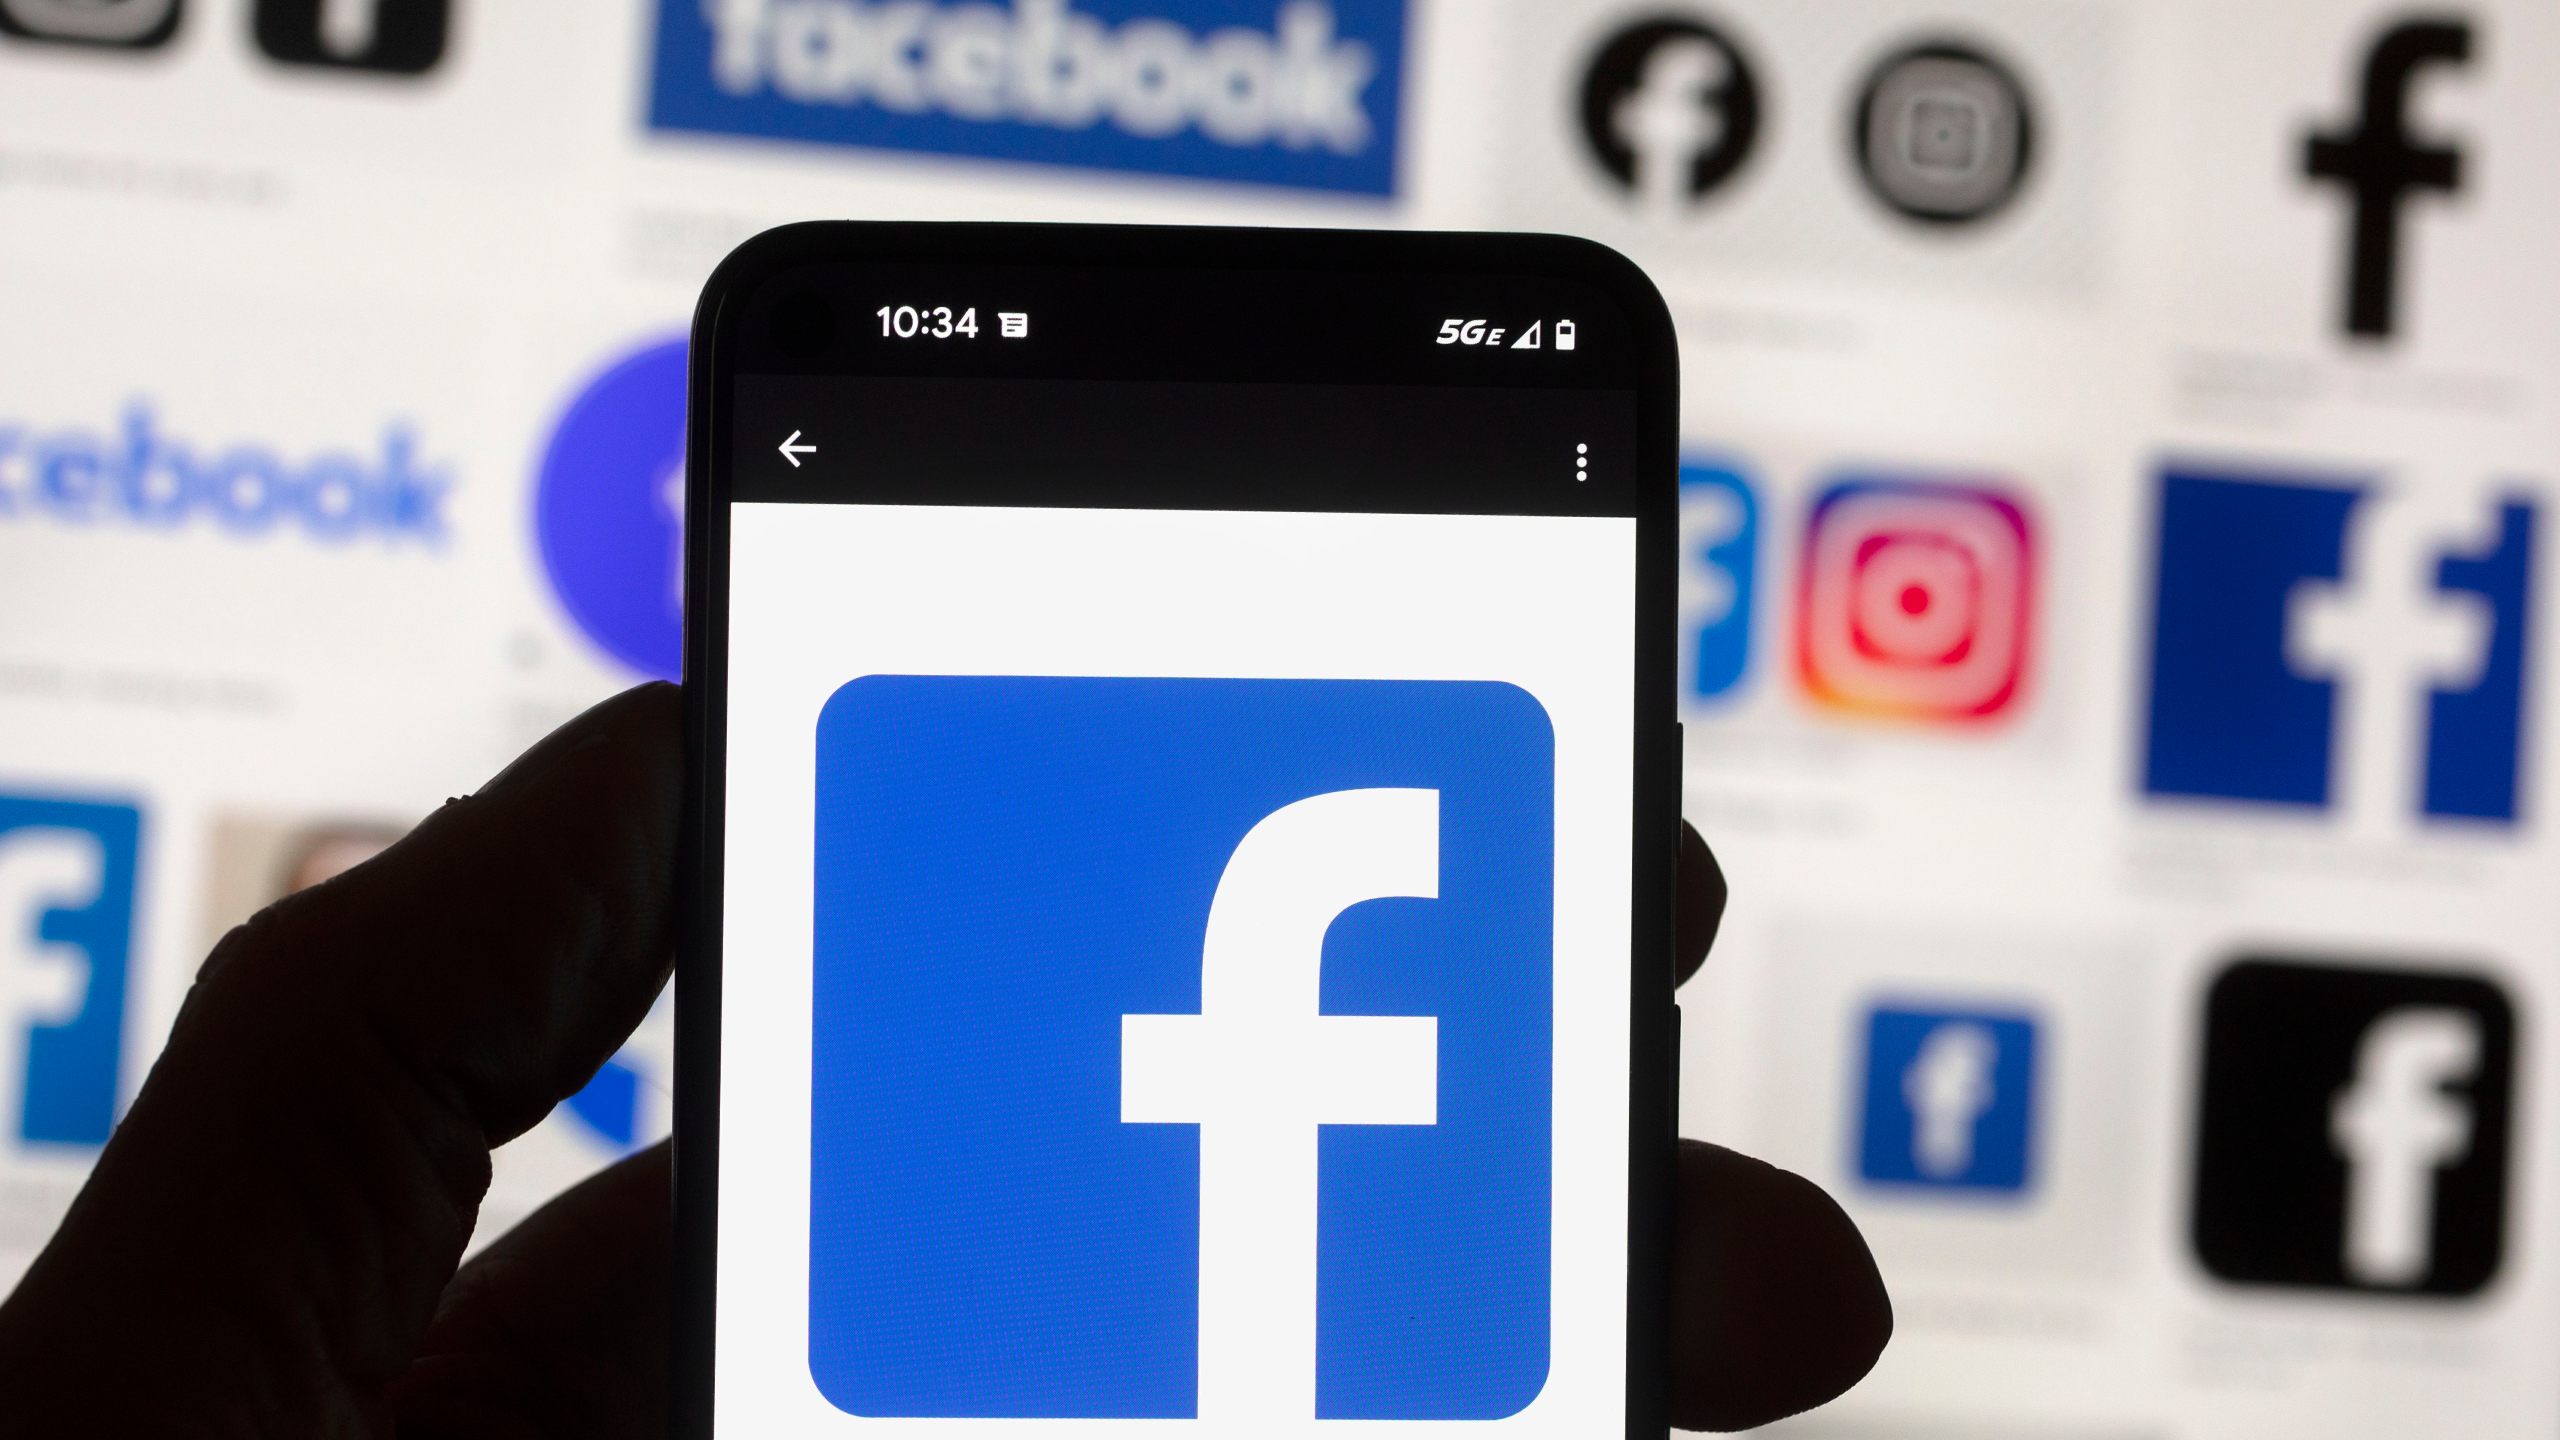 FILE - The Facebook logo is seen on a cell phone in Boston, USA, Oct. 14, 2022. Users of Meta's Facebook, Instagram, Threads and Messenger platforms are experiencing login issues in what appears to be a widespread outage. (AP Photo/Michael Dwyer, File)